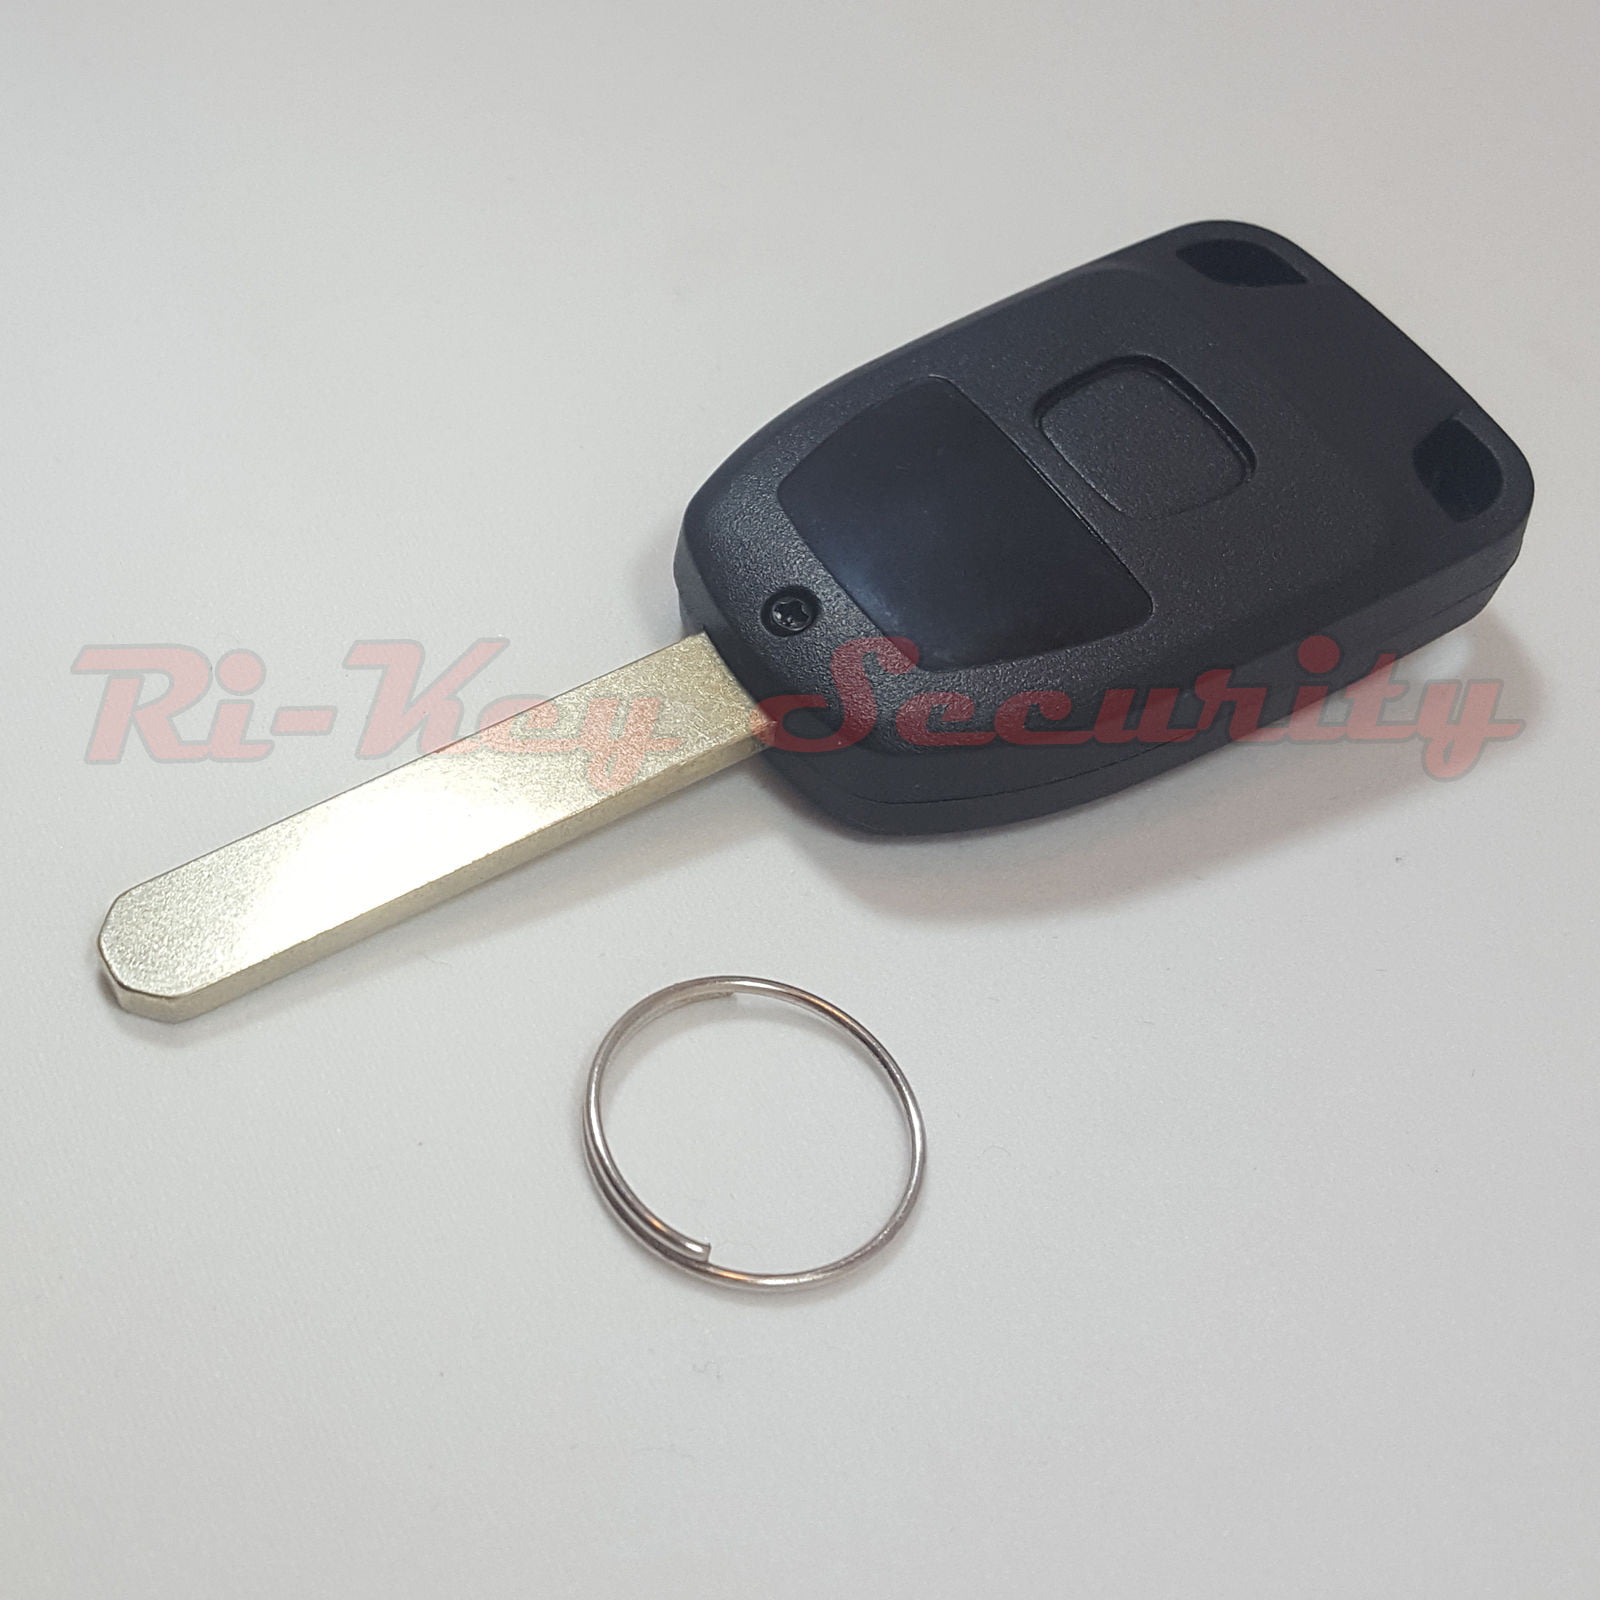 Remote Case StandardAutoPart New Replacement Car Remote Head Key Shell Case compatible with Honda Odyssey 2011 2012 2013 5 Button 